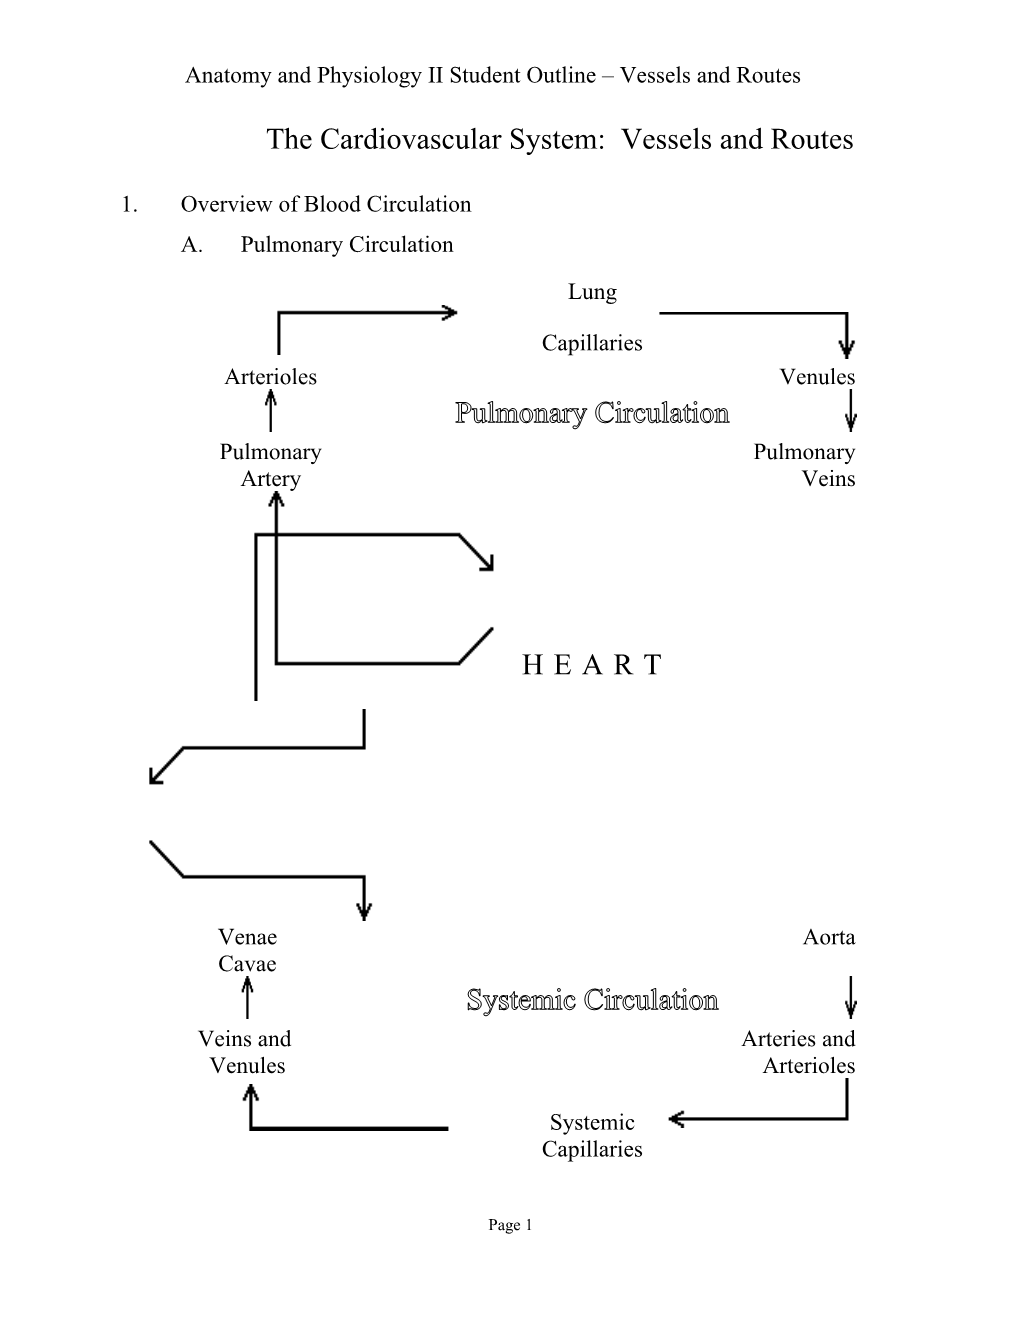 The Cardiovascular System: Vessels and Routes